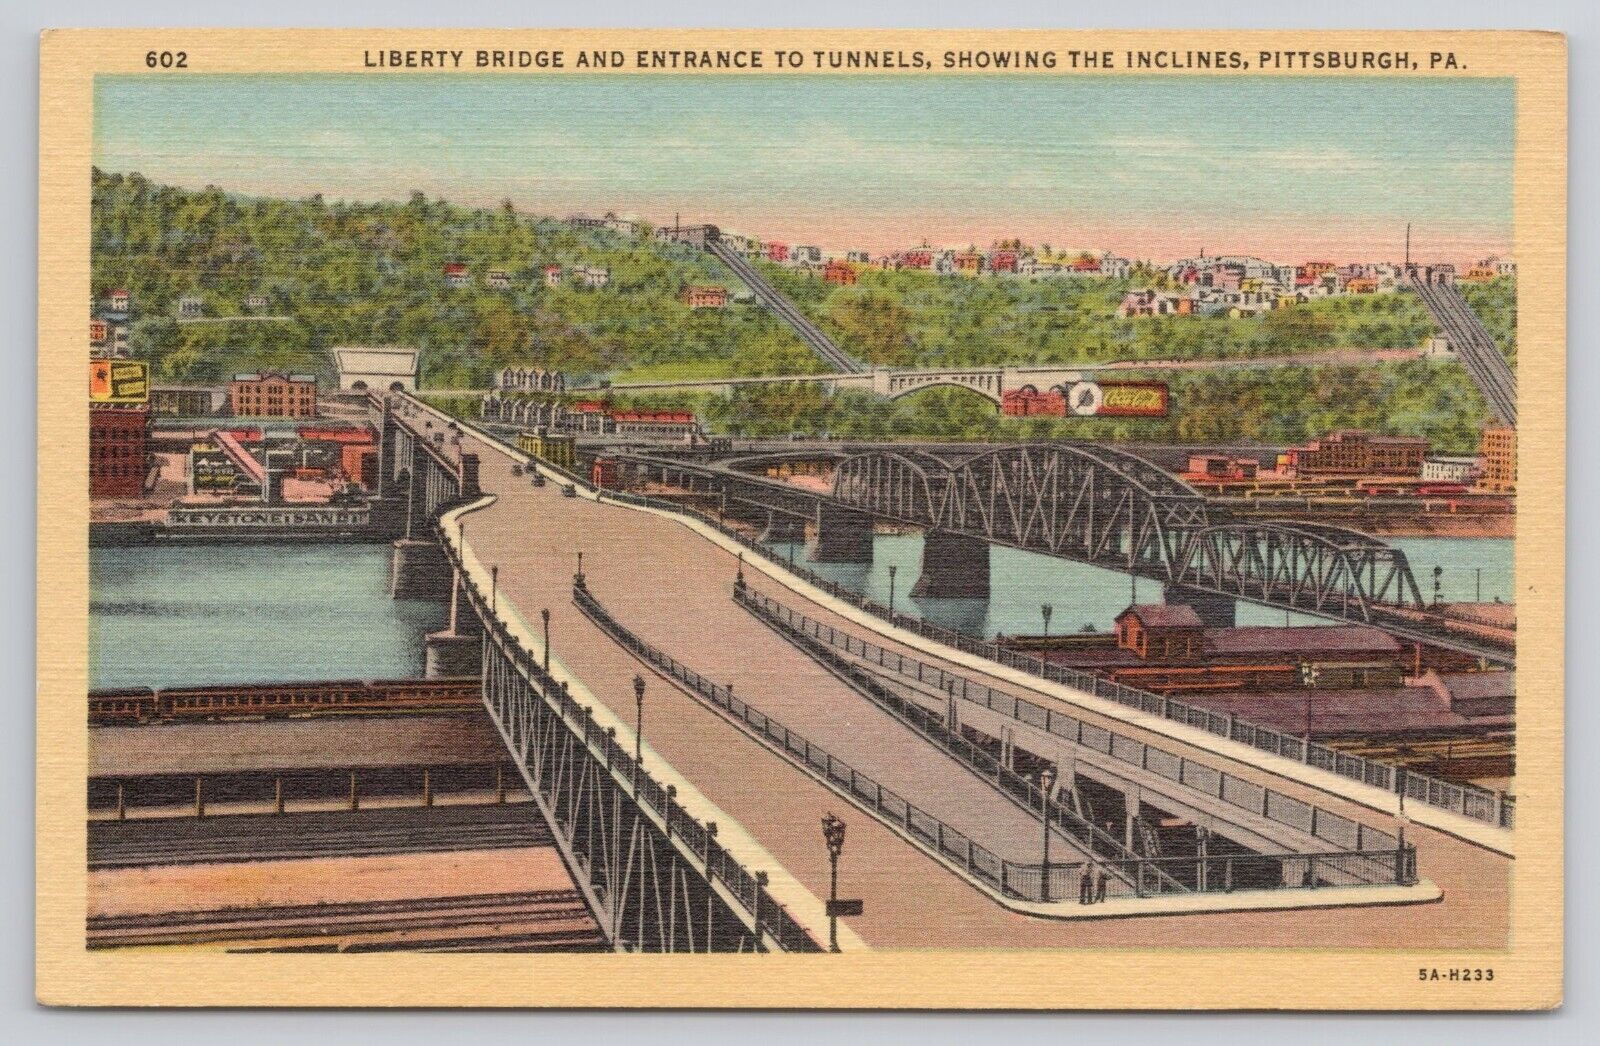 Pittsburgh PA Liberty Bridge Entrance to Tunnels Showing Inclines 1935 Postcard